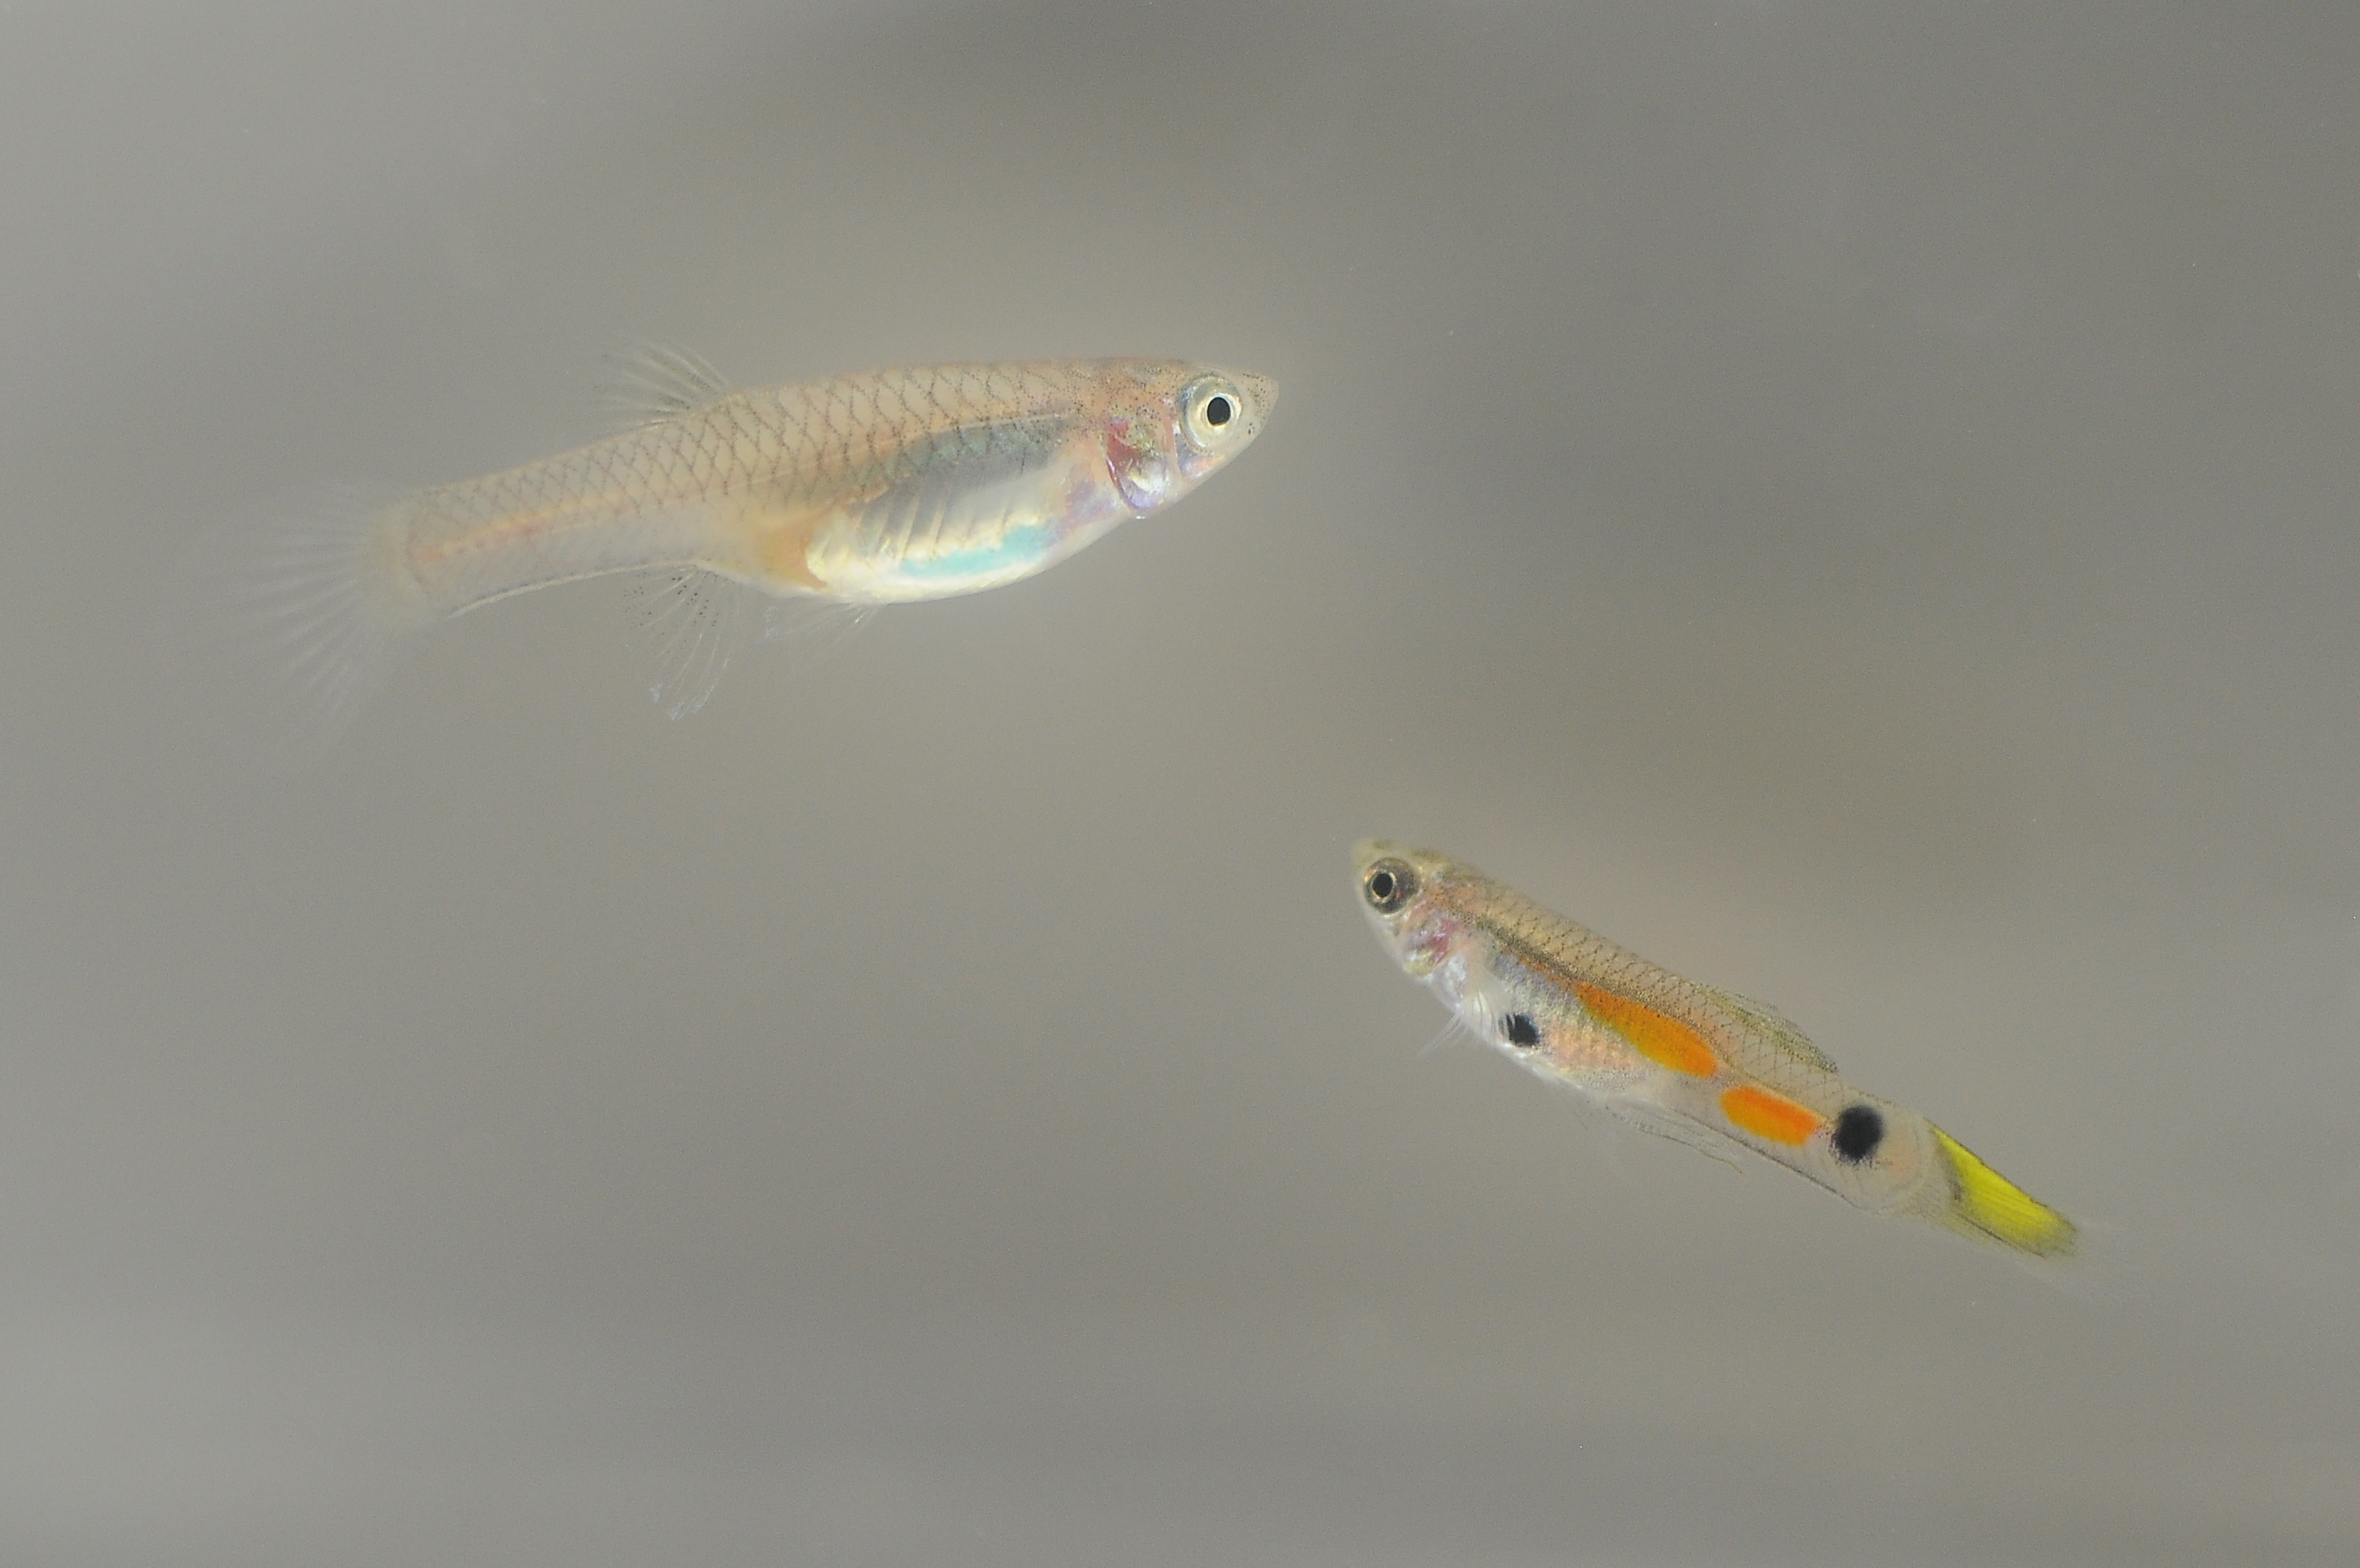 Female guppies, like the fish the left, saw no reproductive advantage from leaving home. On the other hand, males, like the fish on the right, who moved more had more offspring. Credit: Courtesy of the Fitzpatrick Lab